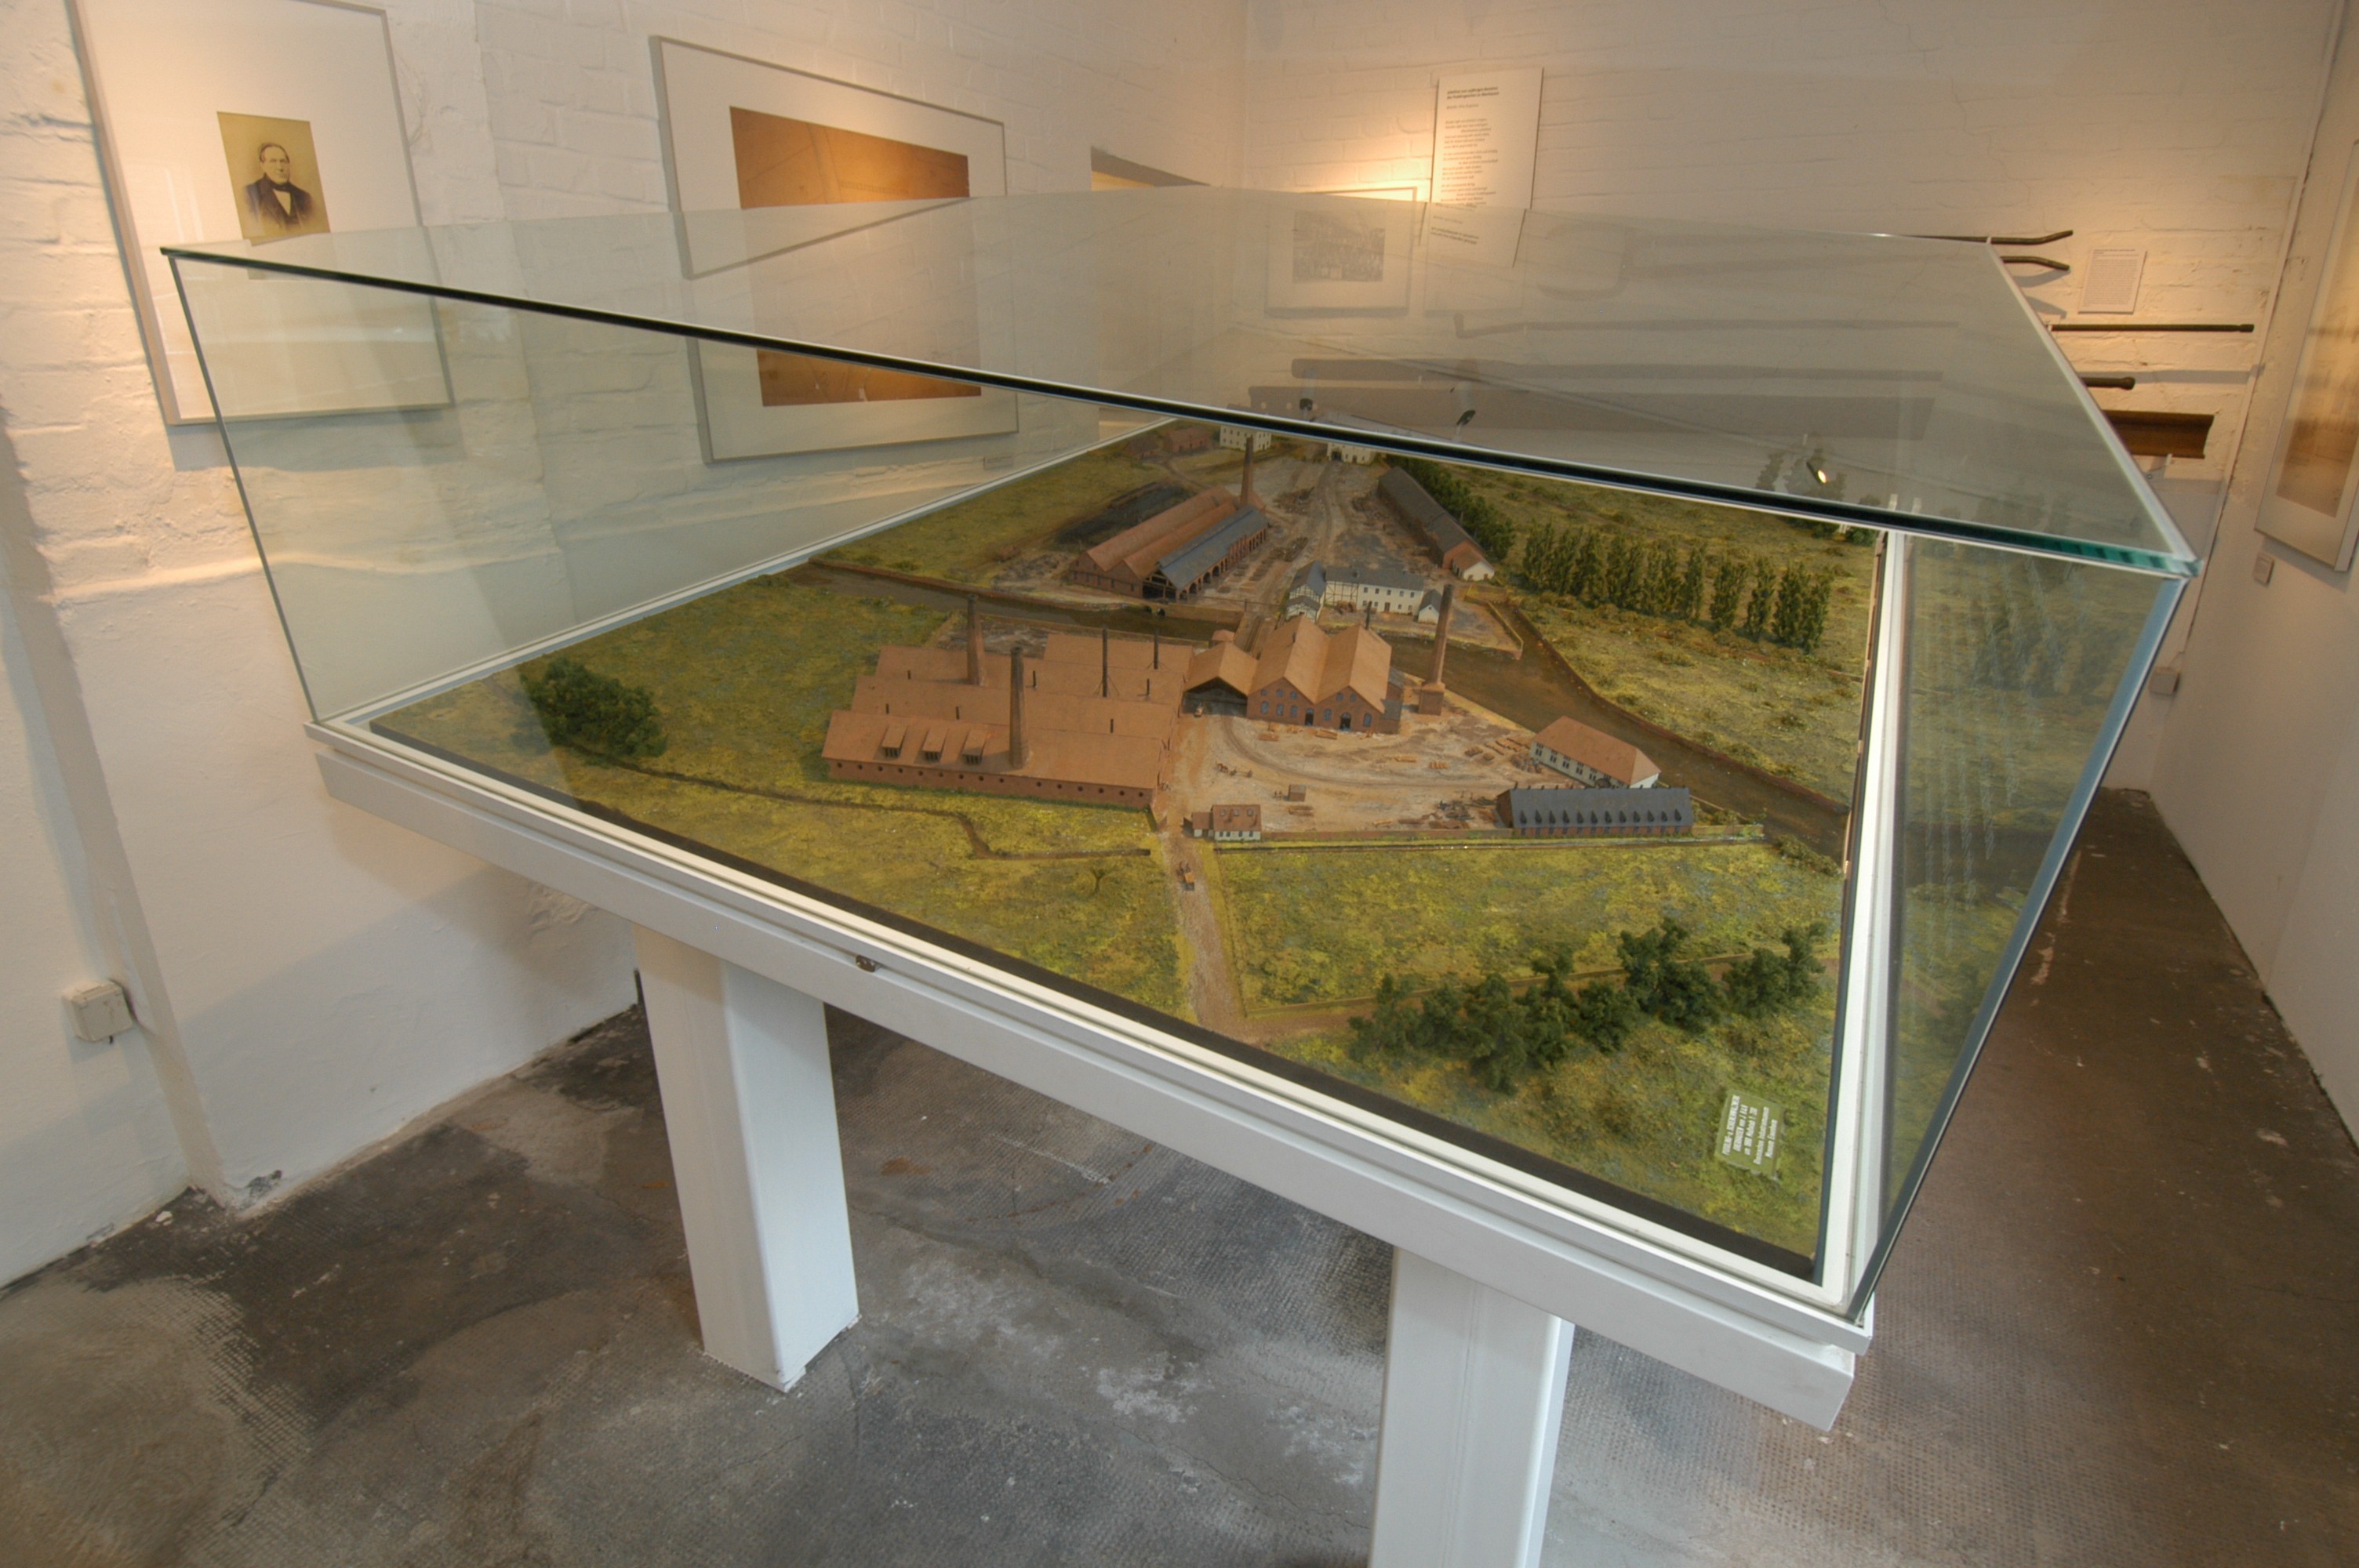 The growing need for workers in the puddling works and the rolling mill “Alte Walz” on the river Emscher in Oberhausen was one of the most important factors for building the Eisenheim housing estate. The accurate model illustrates the works around 1860. 